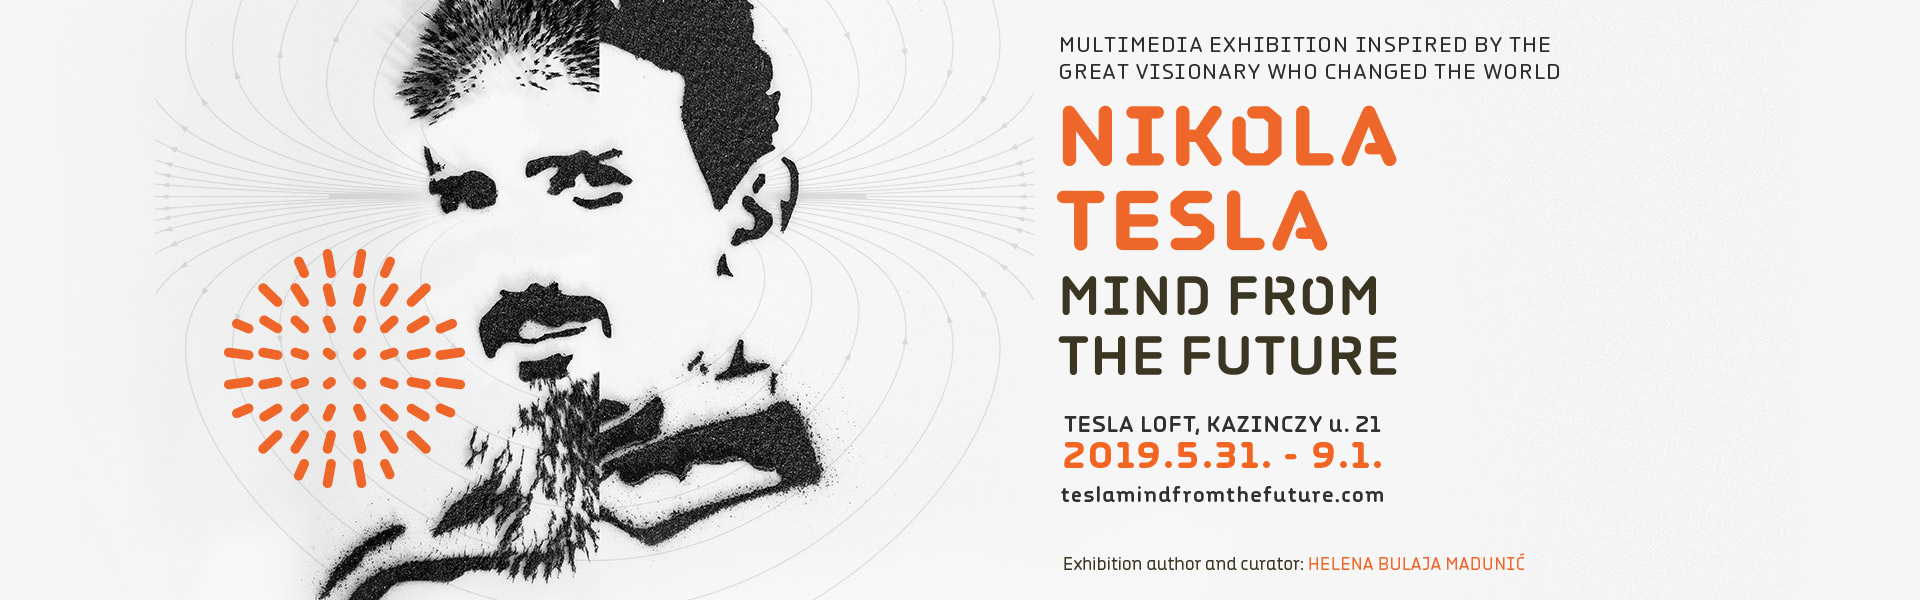 Nikola Tesla - 'Mind From The Future Exhibition' In Budapest